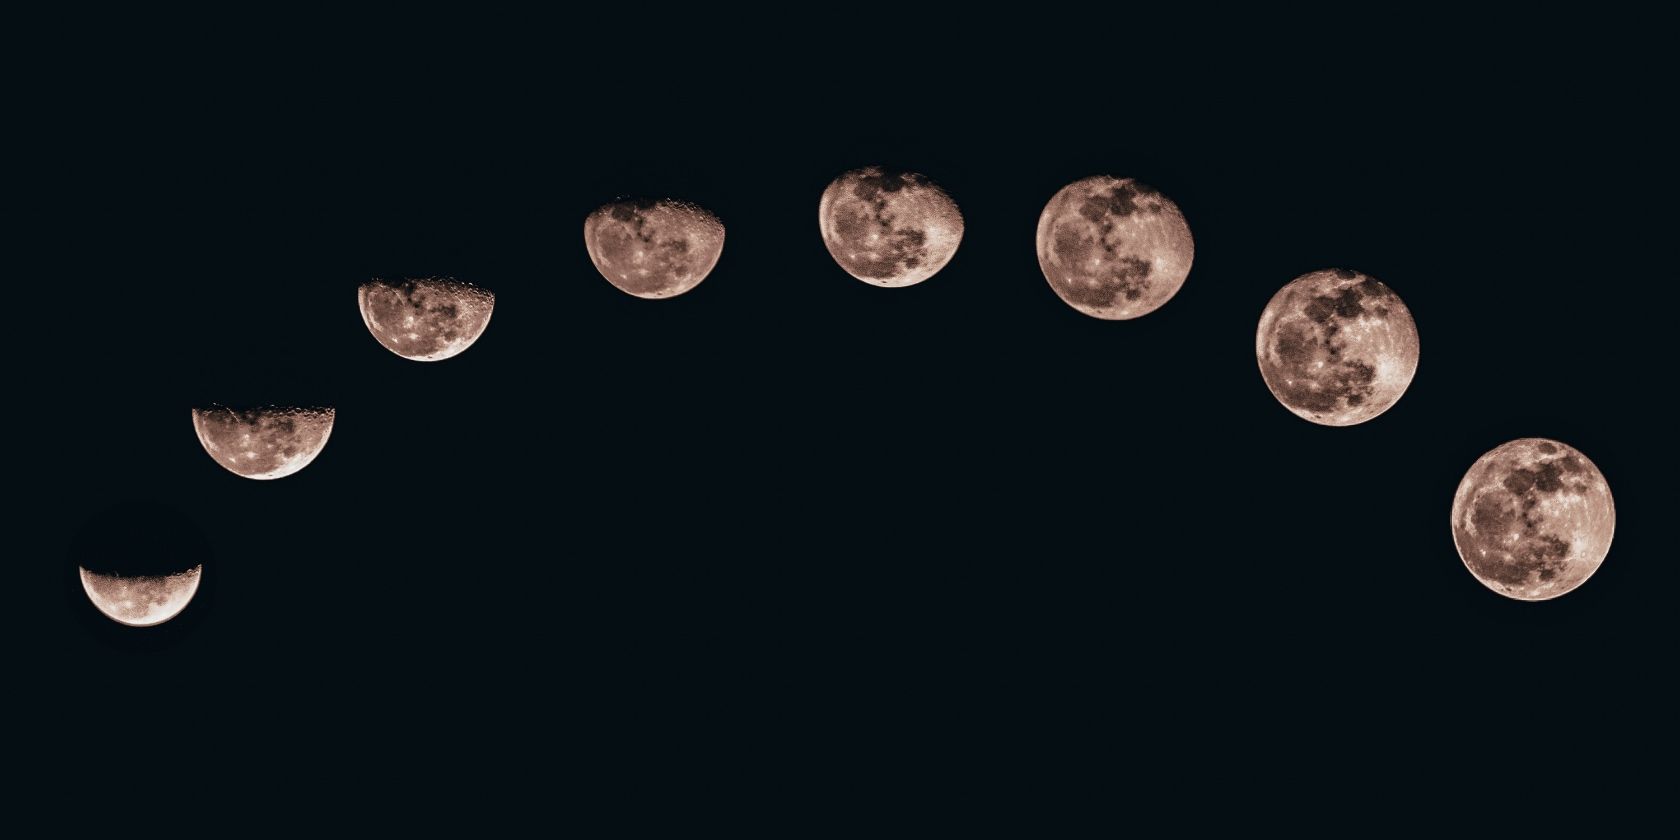 Depiction of moon phases